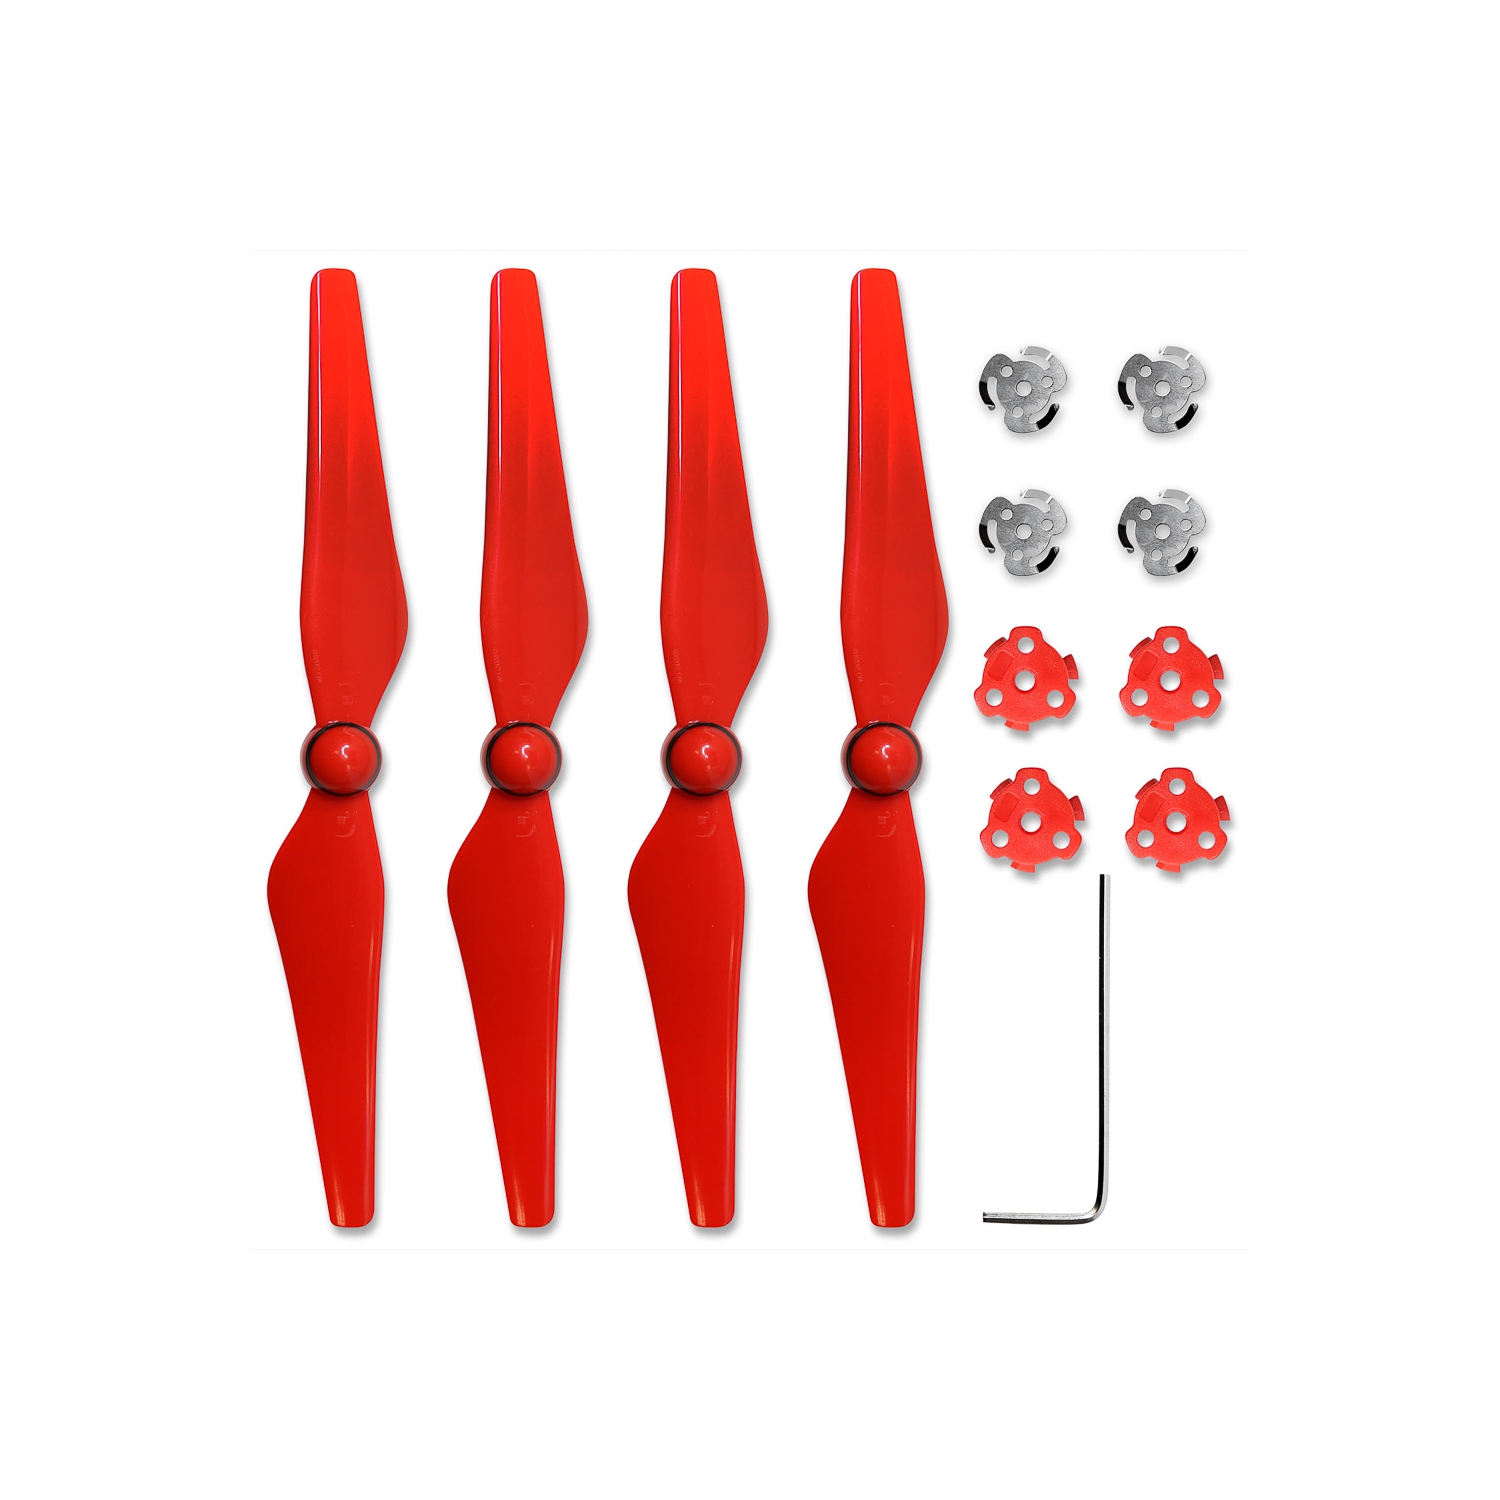 Ultimaxx 2 Pairs Quick Release Propellers Blades For DJI Phantom 4 Pro And Phantom 4 Advanced (Red) - Installation Kit Include